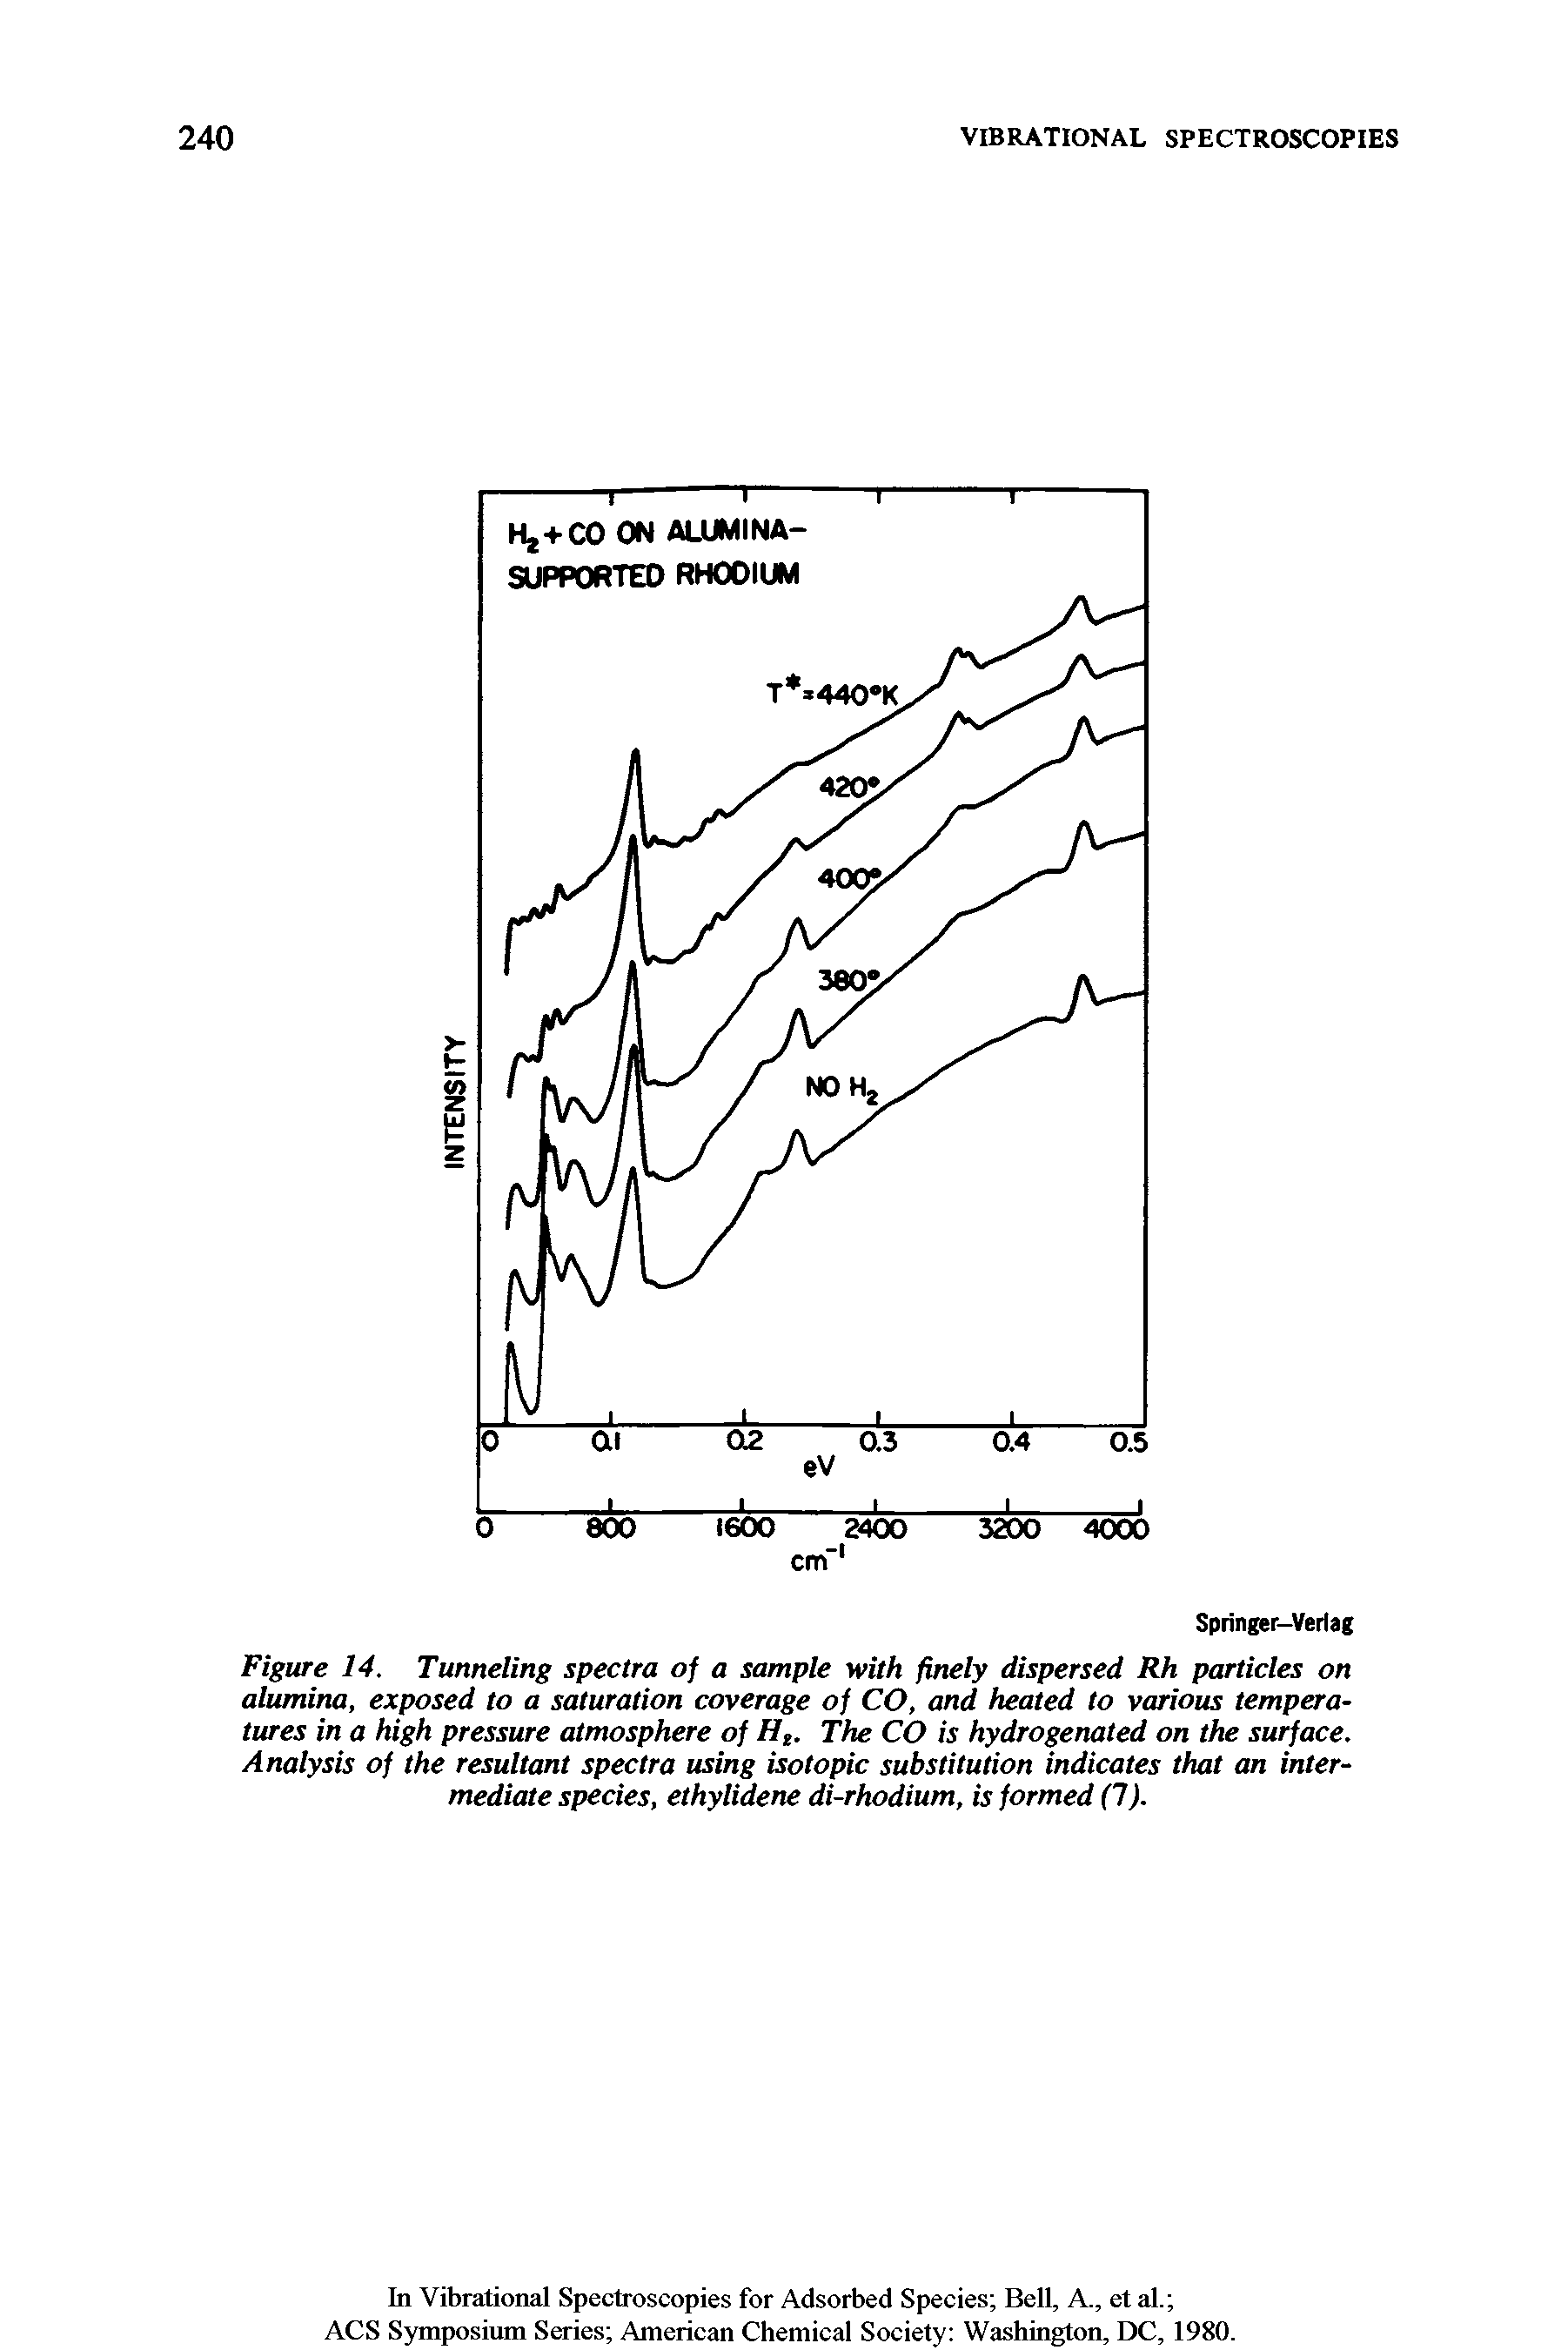 Figure 14. Tunneling spectra of a sample with finely dispersed Rh particles on alumina, exposed to a saturation coverage of CO, and heated to various temperatures in a high pressure atmosphere of Ht. The CO is hydrogenated on the surface. Analysis of the resultant spectra using isotopic substitution indicates that an intermediate species, ethylidene di-rhodium, is formed (1).